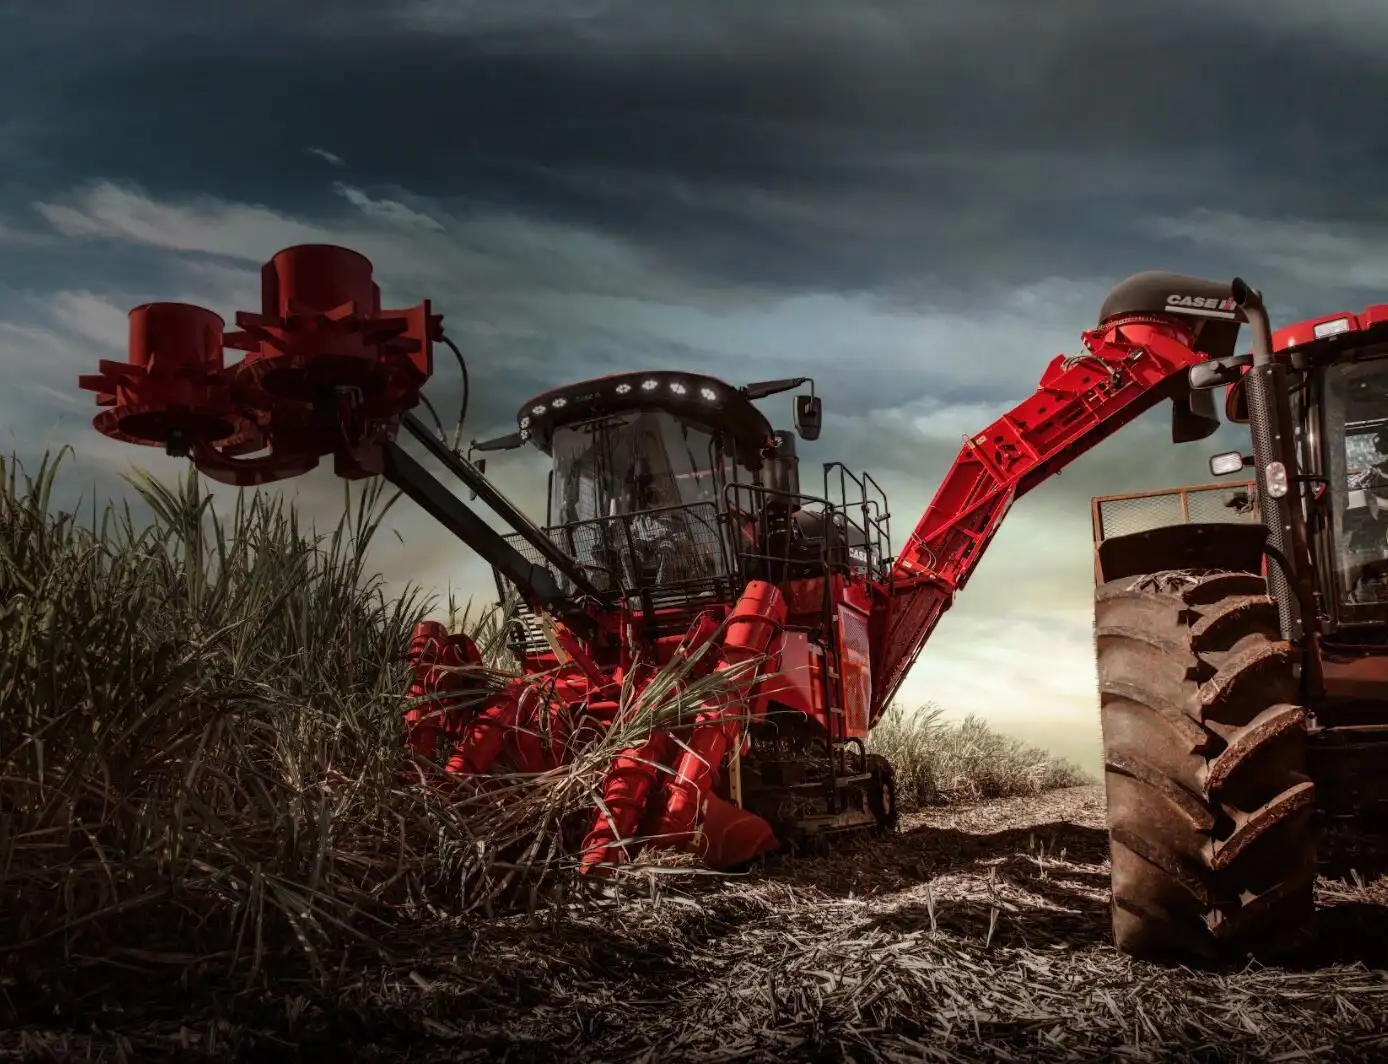 Farm machinery - tractors, harvesters and agricultural technology